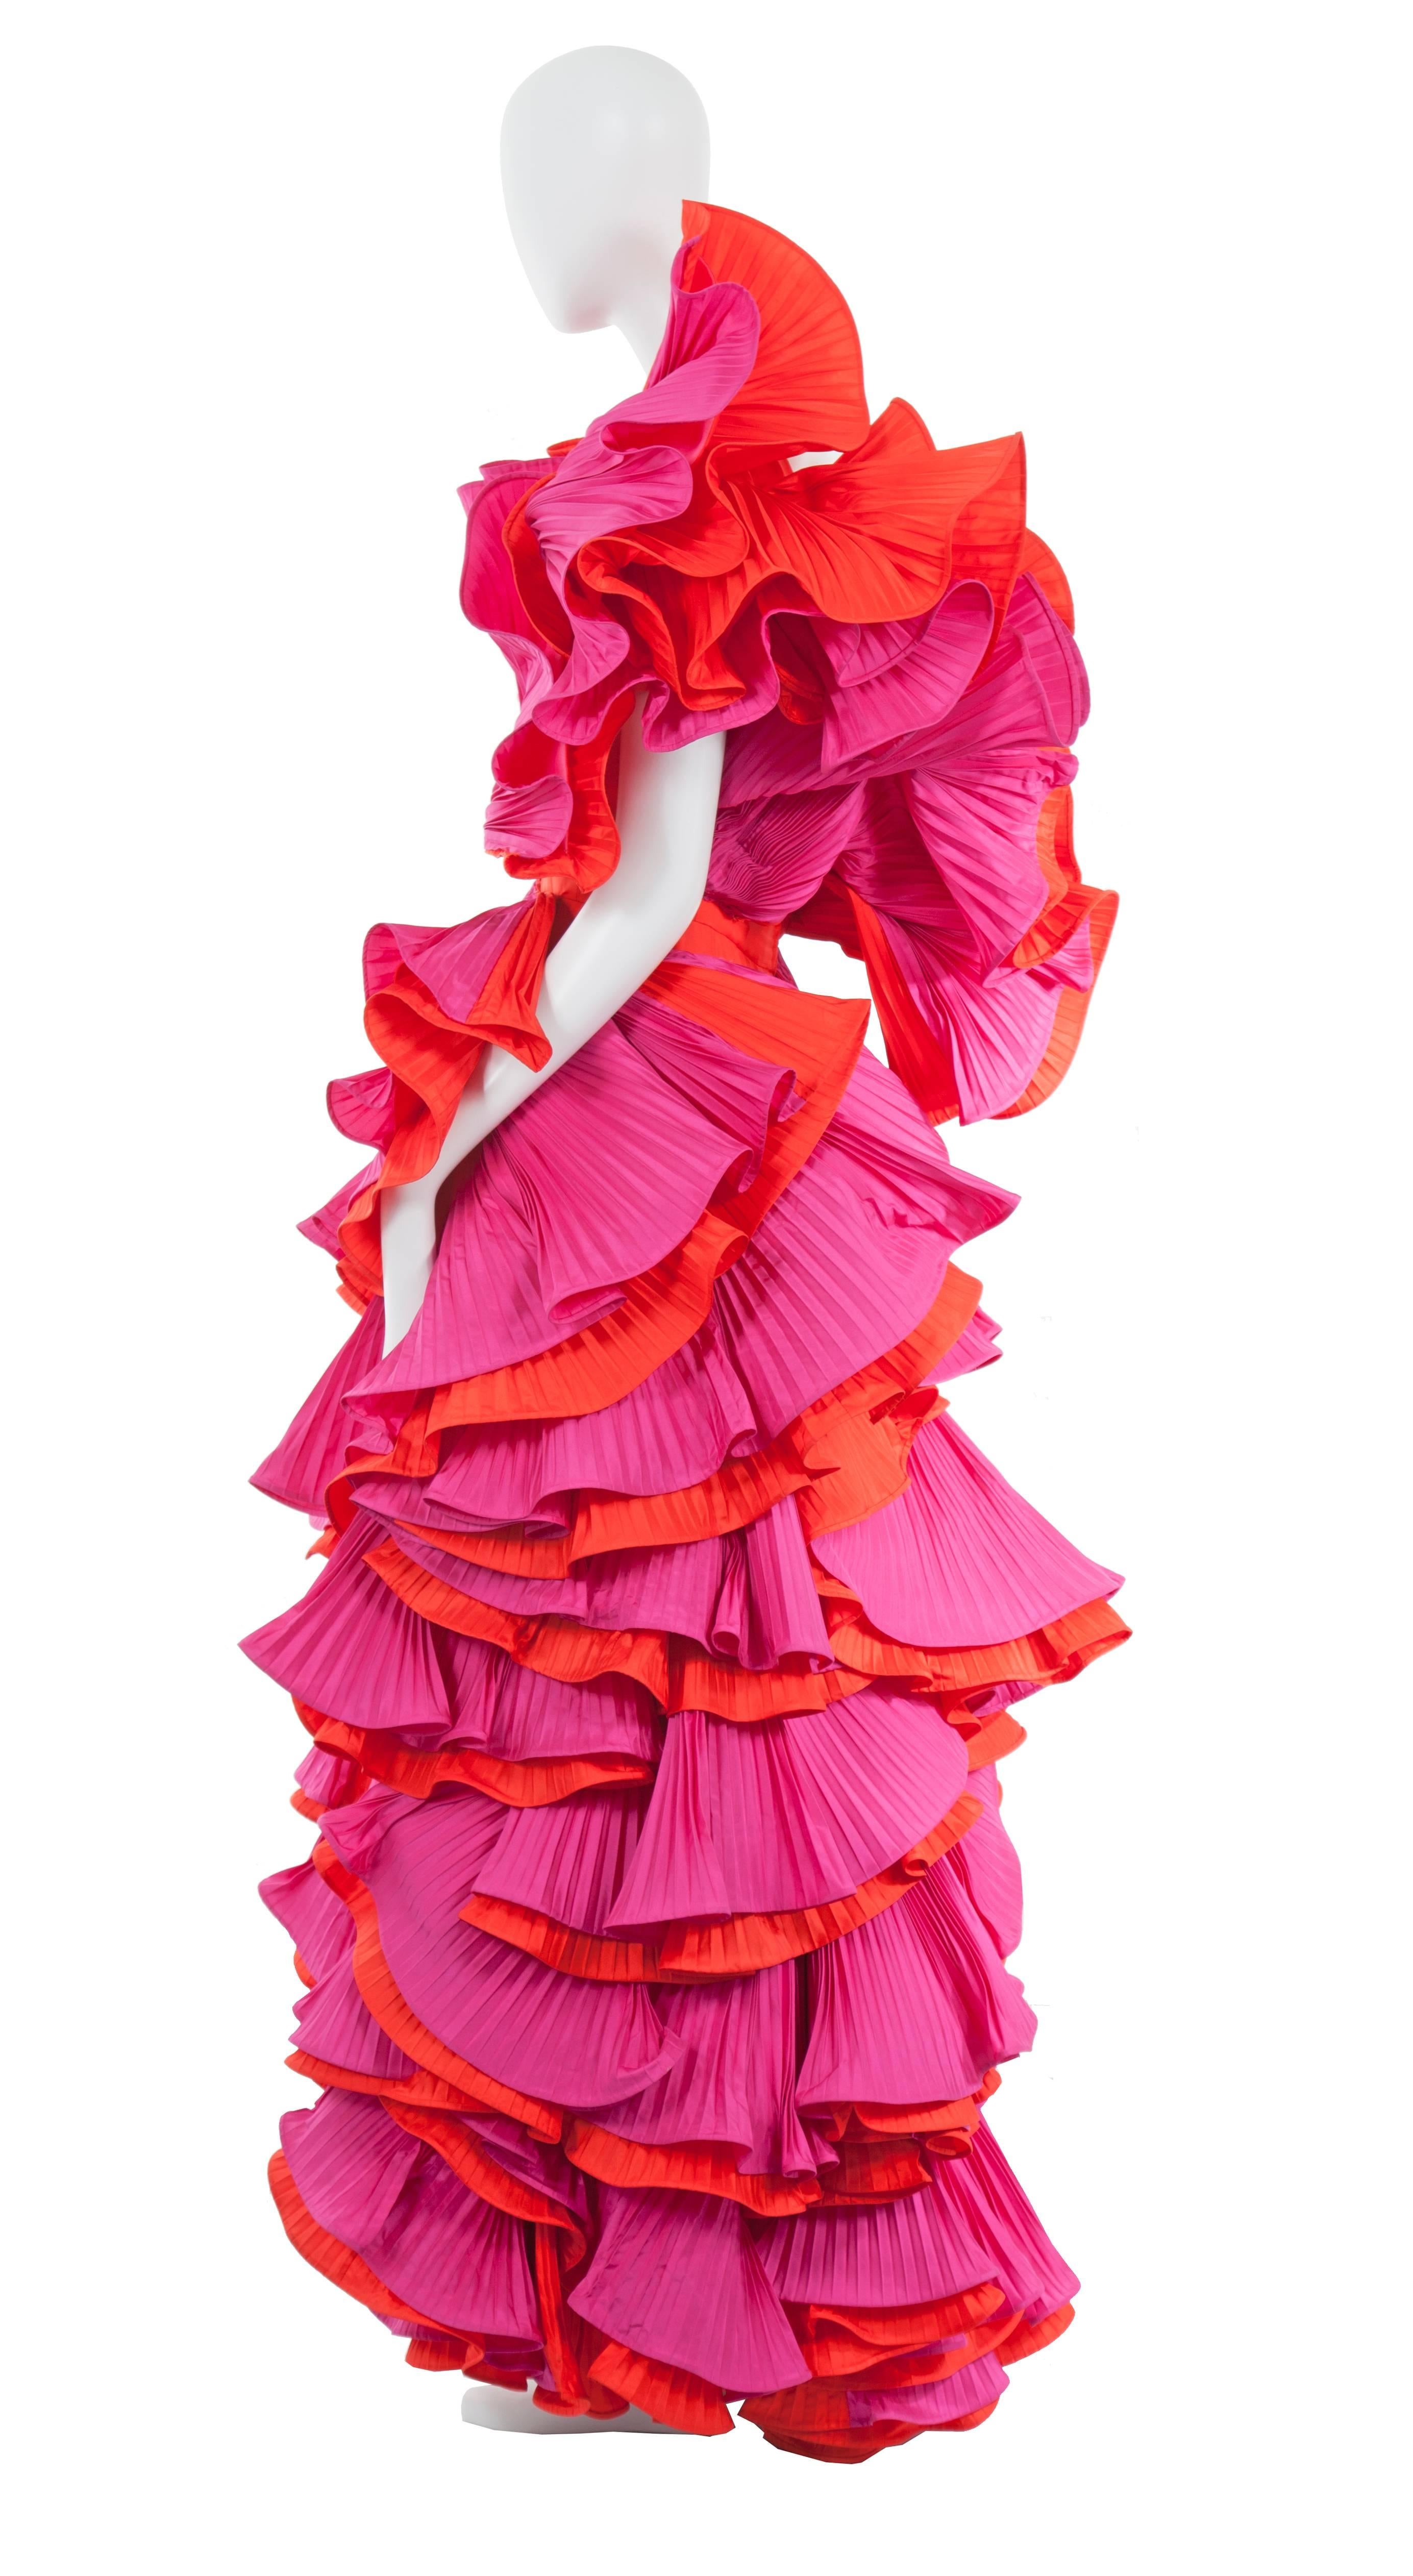 An incredible piece of Roberto Capucci haute couture, this gown would be a truly show-stopping choice for red carpet event. Named ‘Fire’, Capucci was inspired by the natural elements and in particular looked to the organic, spiraling and sinuous